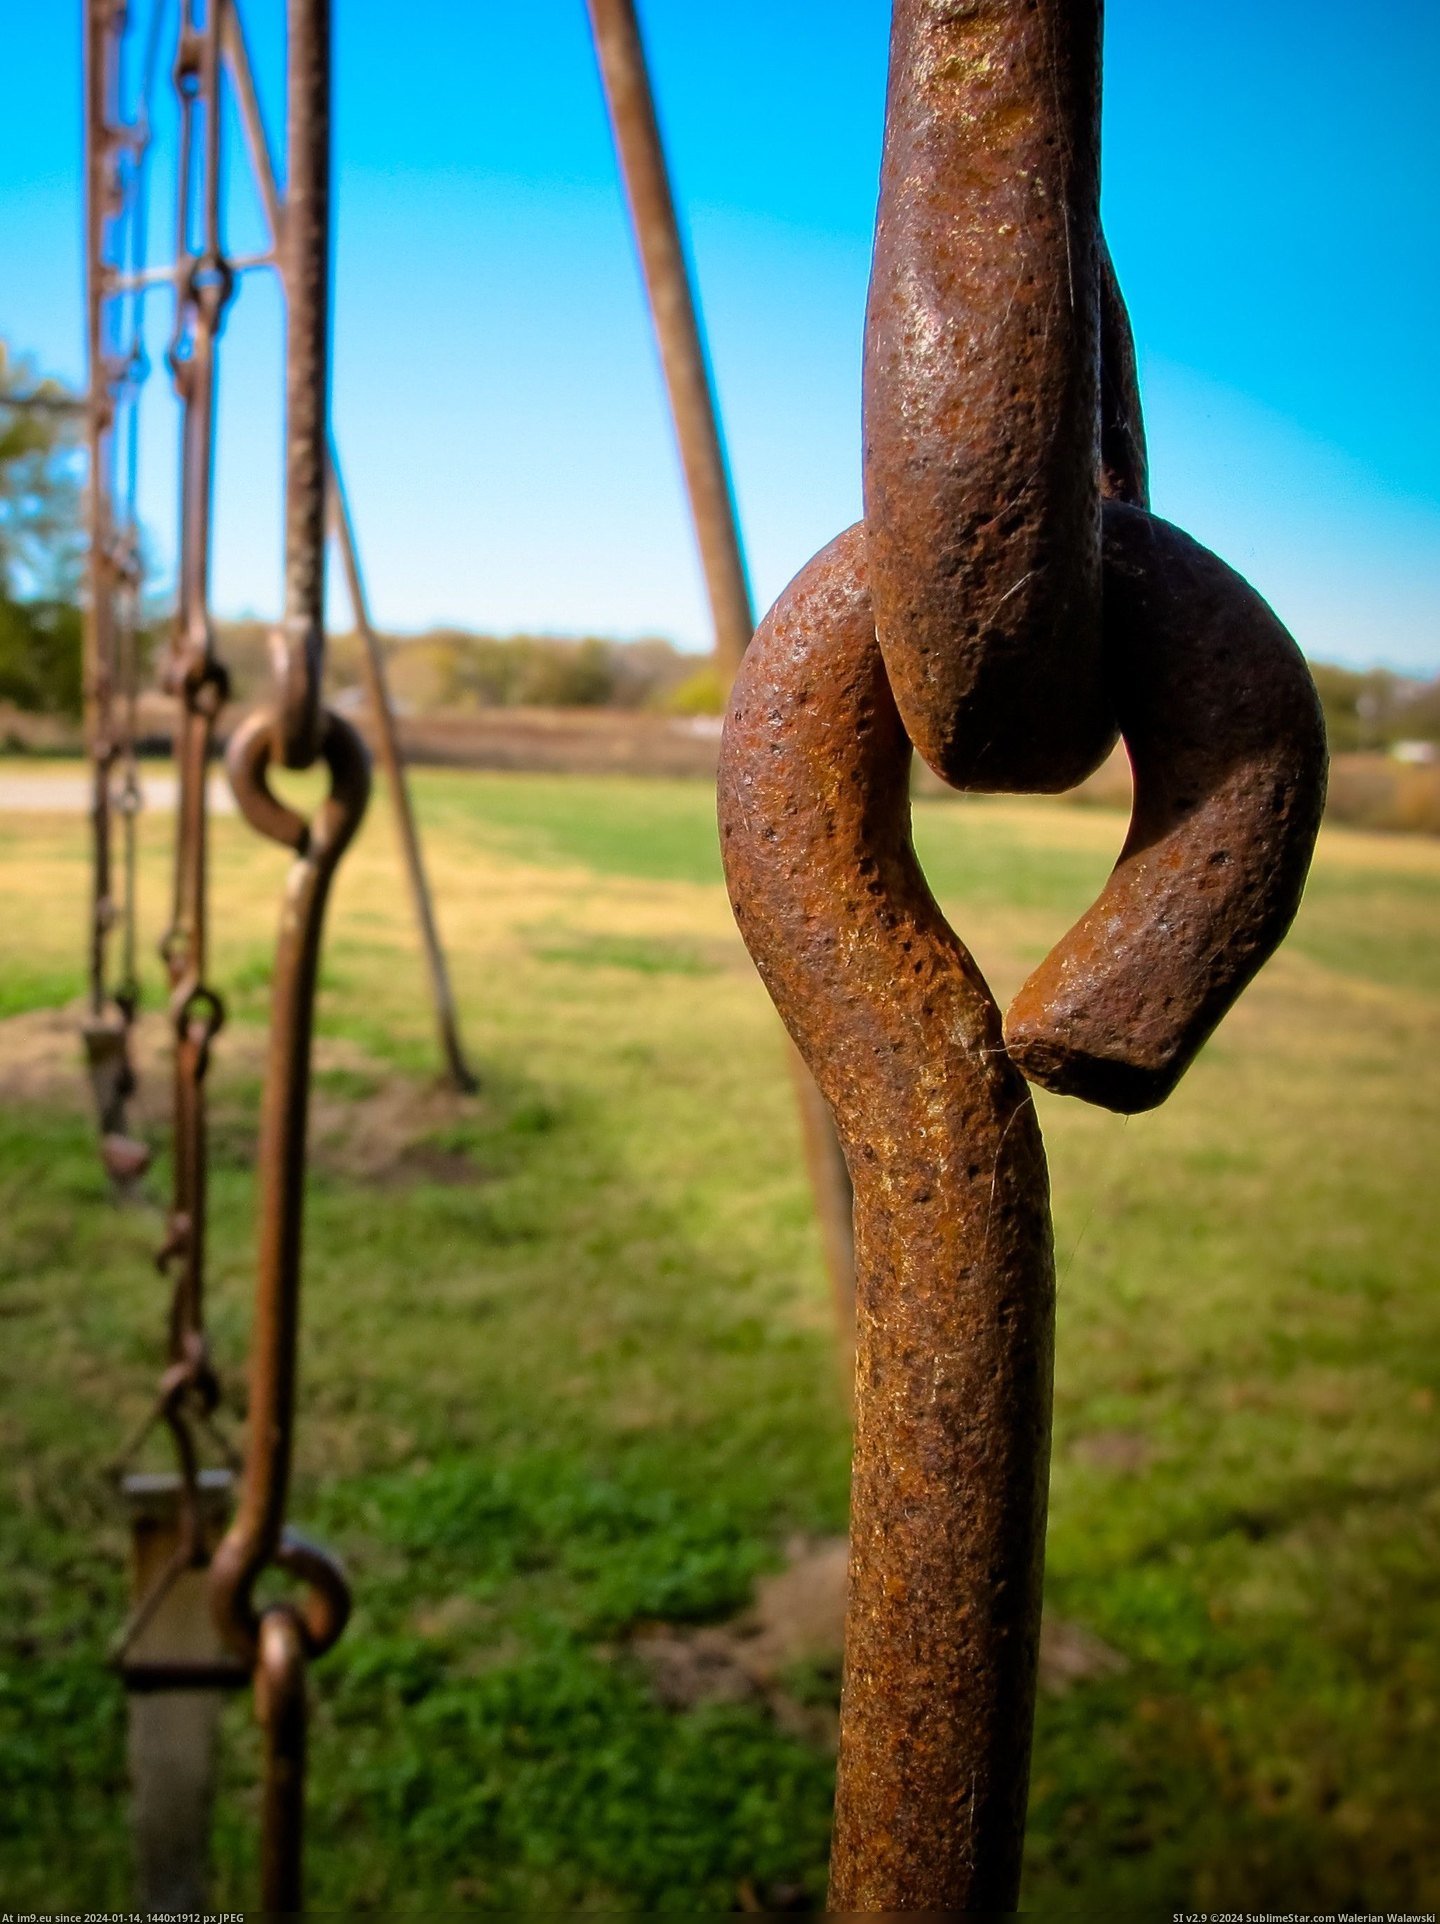 #Old #School #But #Swing #Chains #Hooks #Abandoned #Metal #Set [Pics] I found an old swing set at an abandoned school that didn't have chains, but metal hooks. Pic. (Image of album My r/PICS favs))